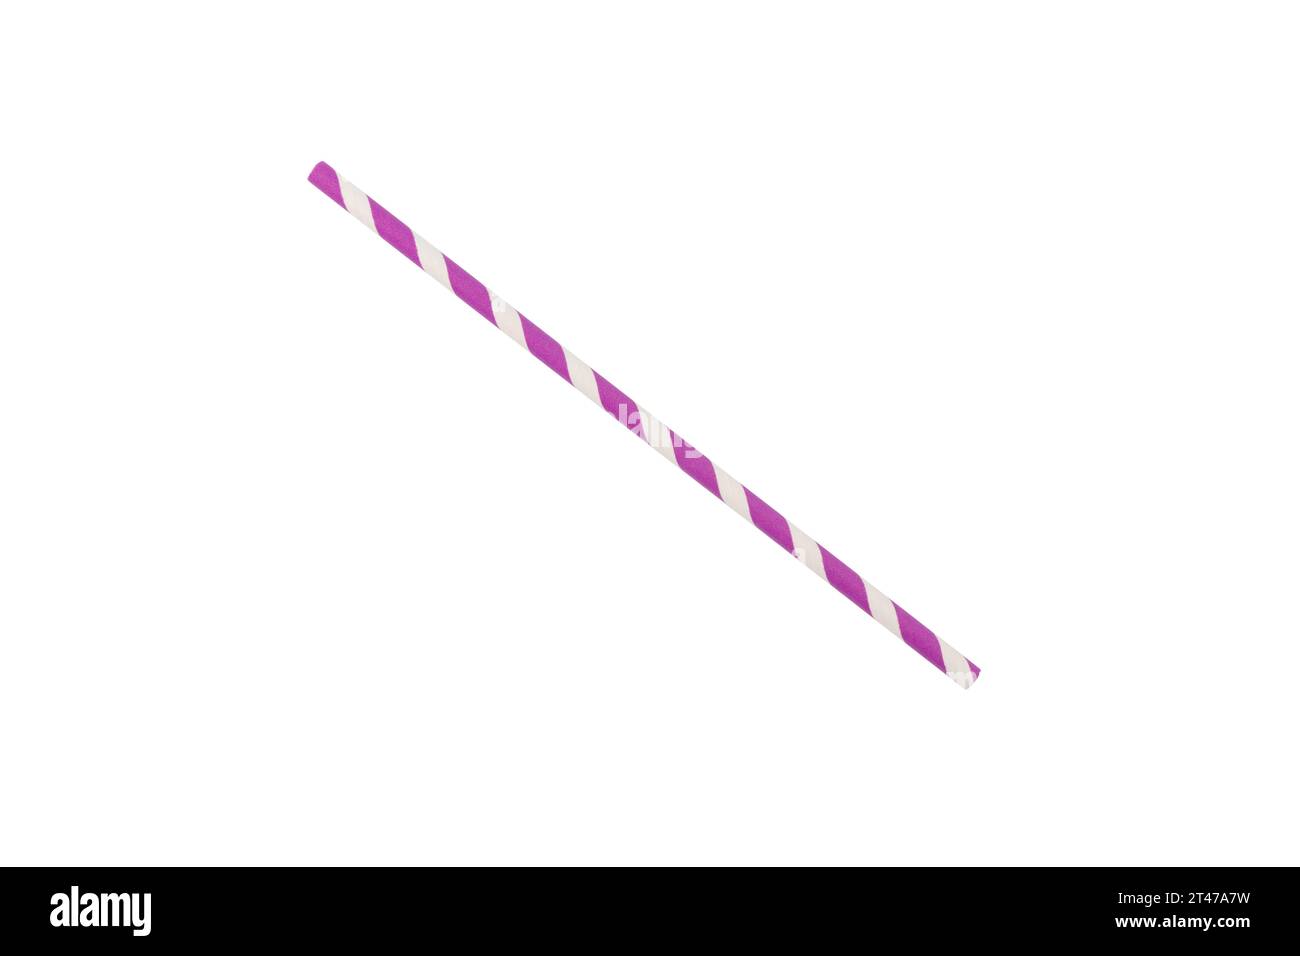 purple striped paper straw isolated on white background Stock Photo